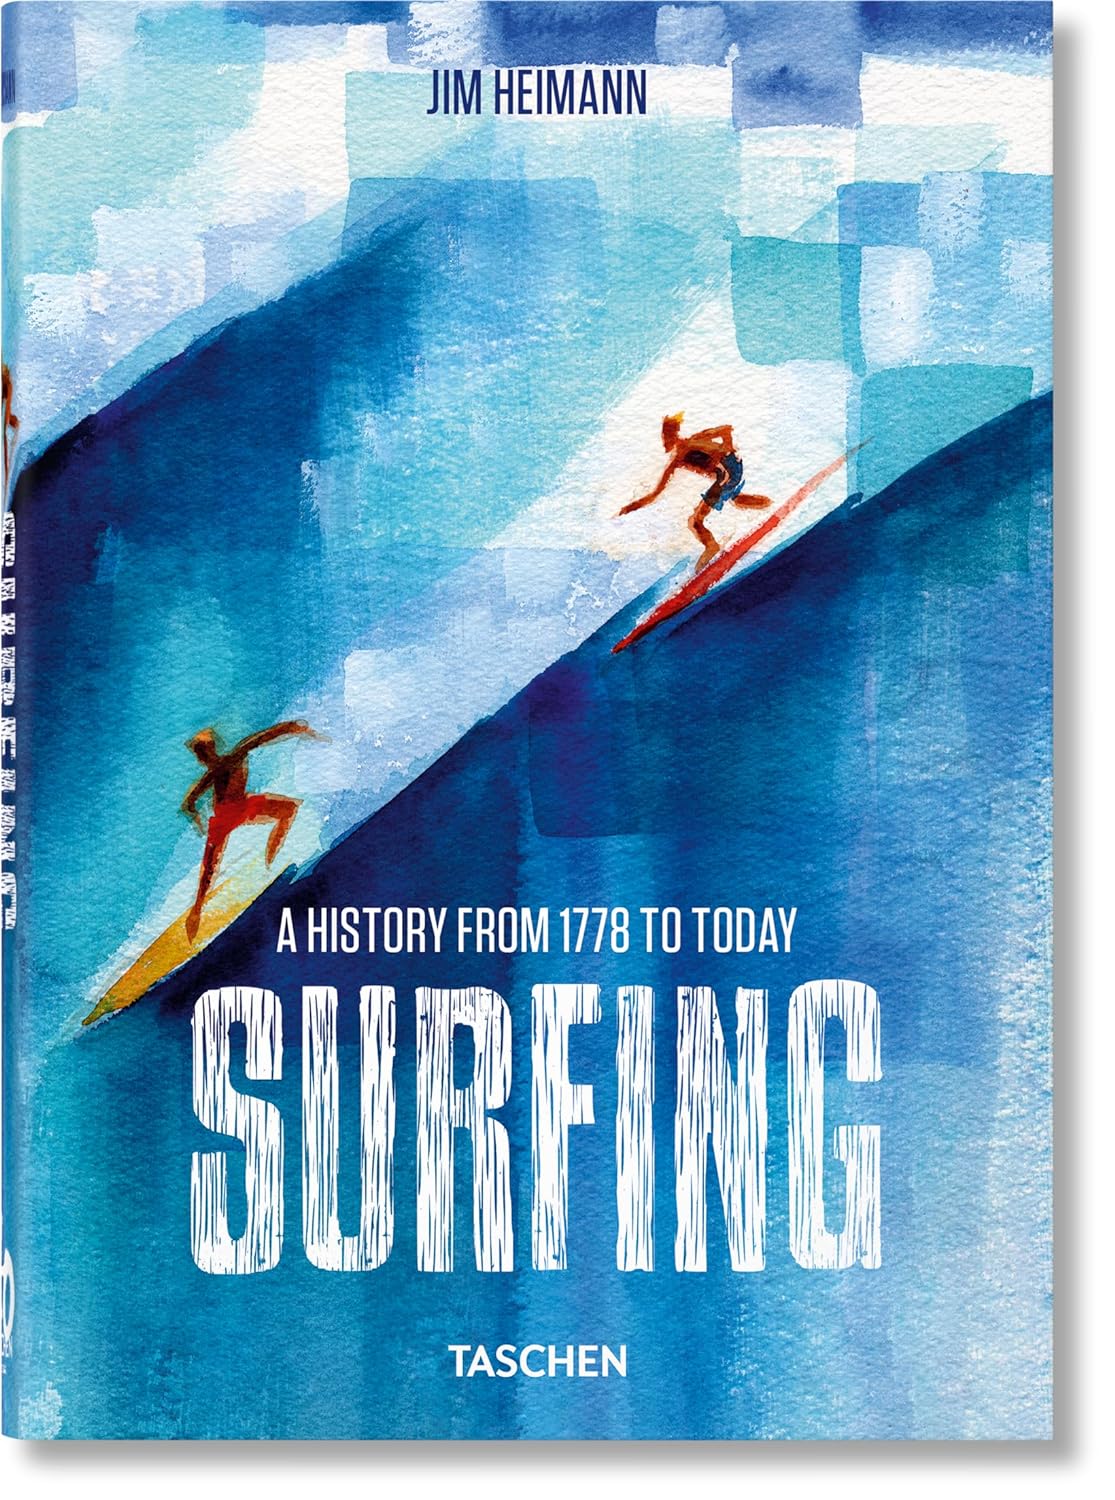 Surfing. A History from 1778 to Today (40th Anniversary Edition) images from the bible old testament